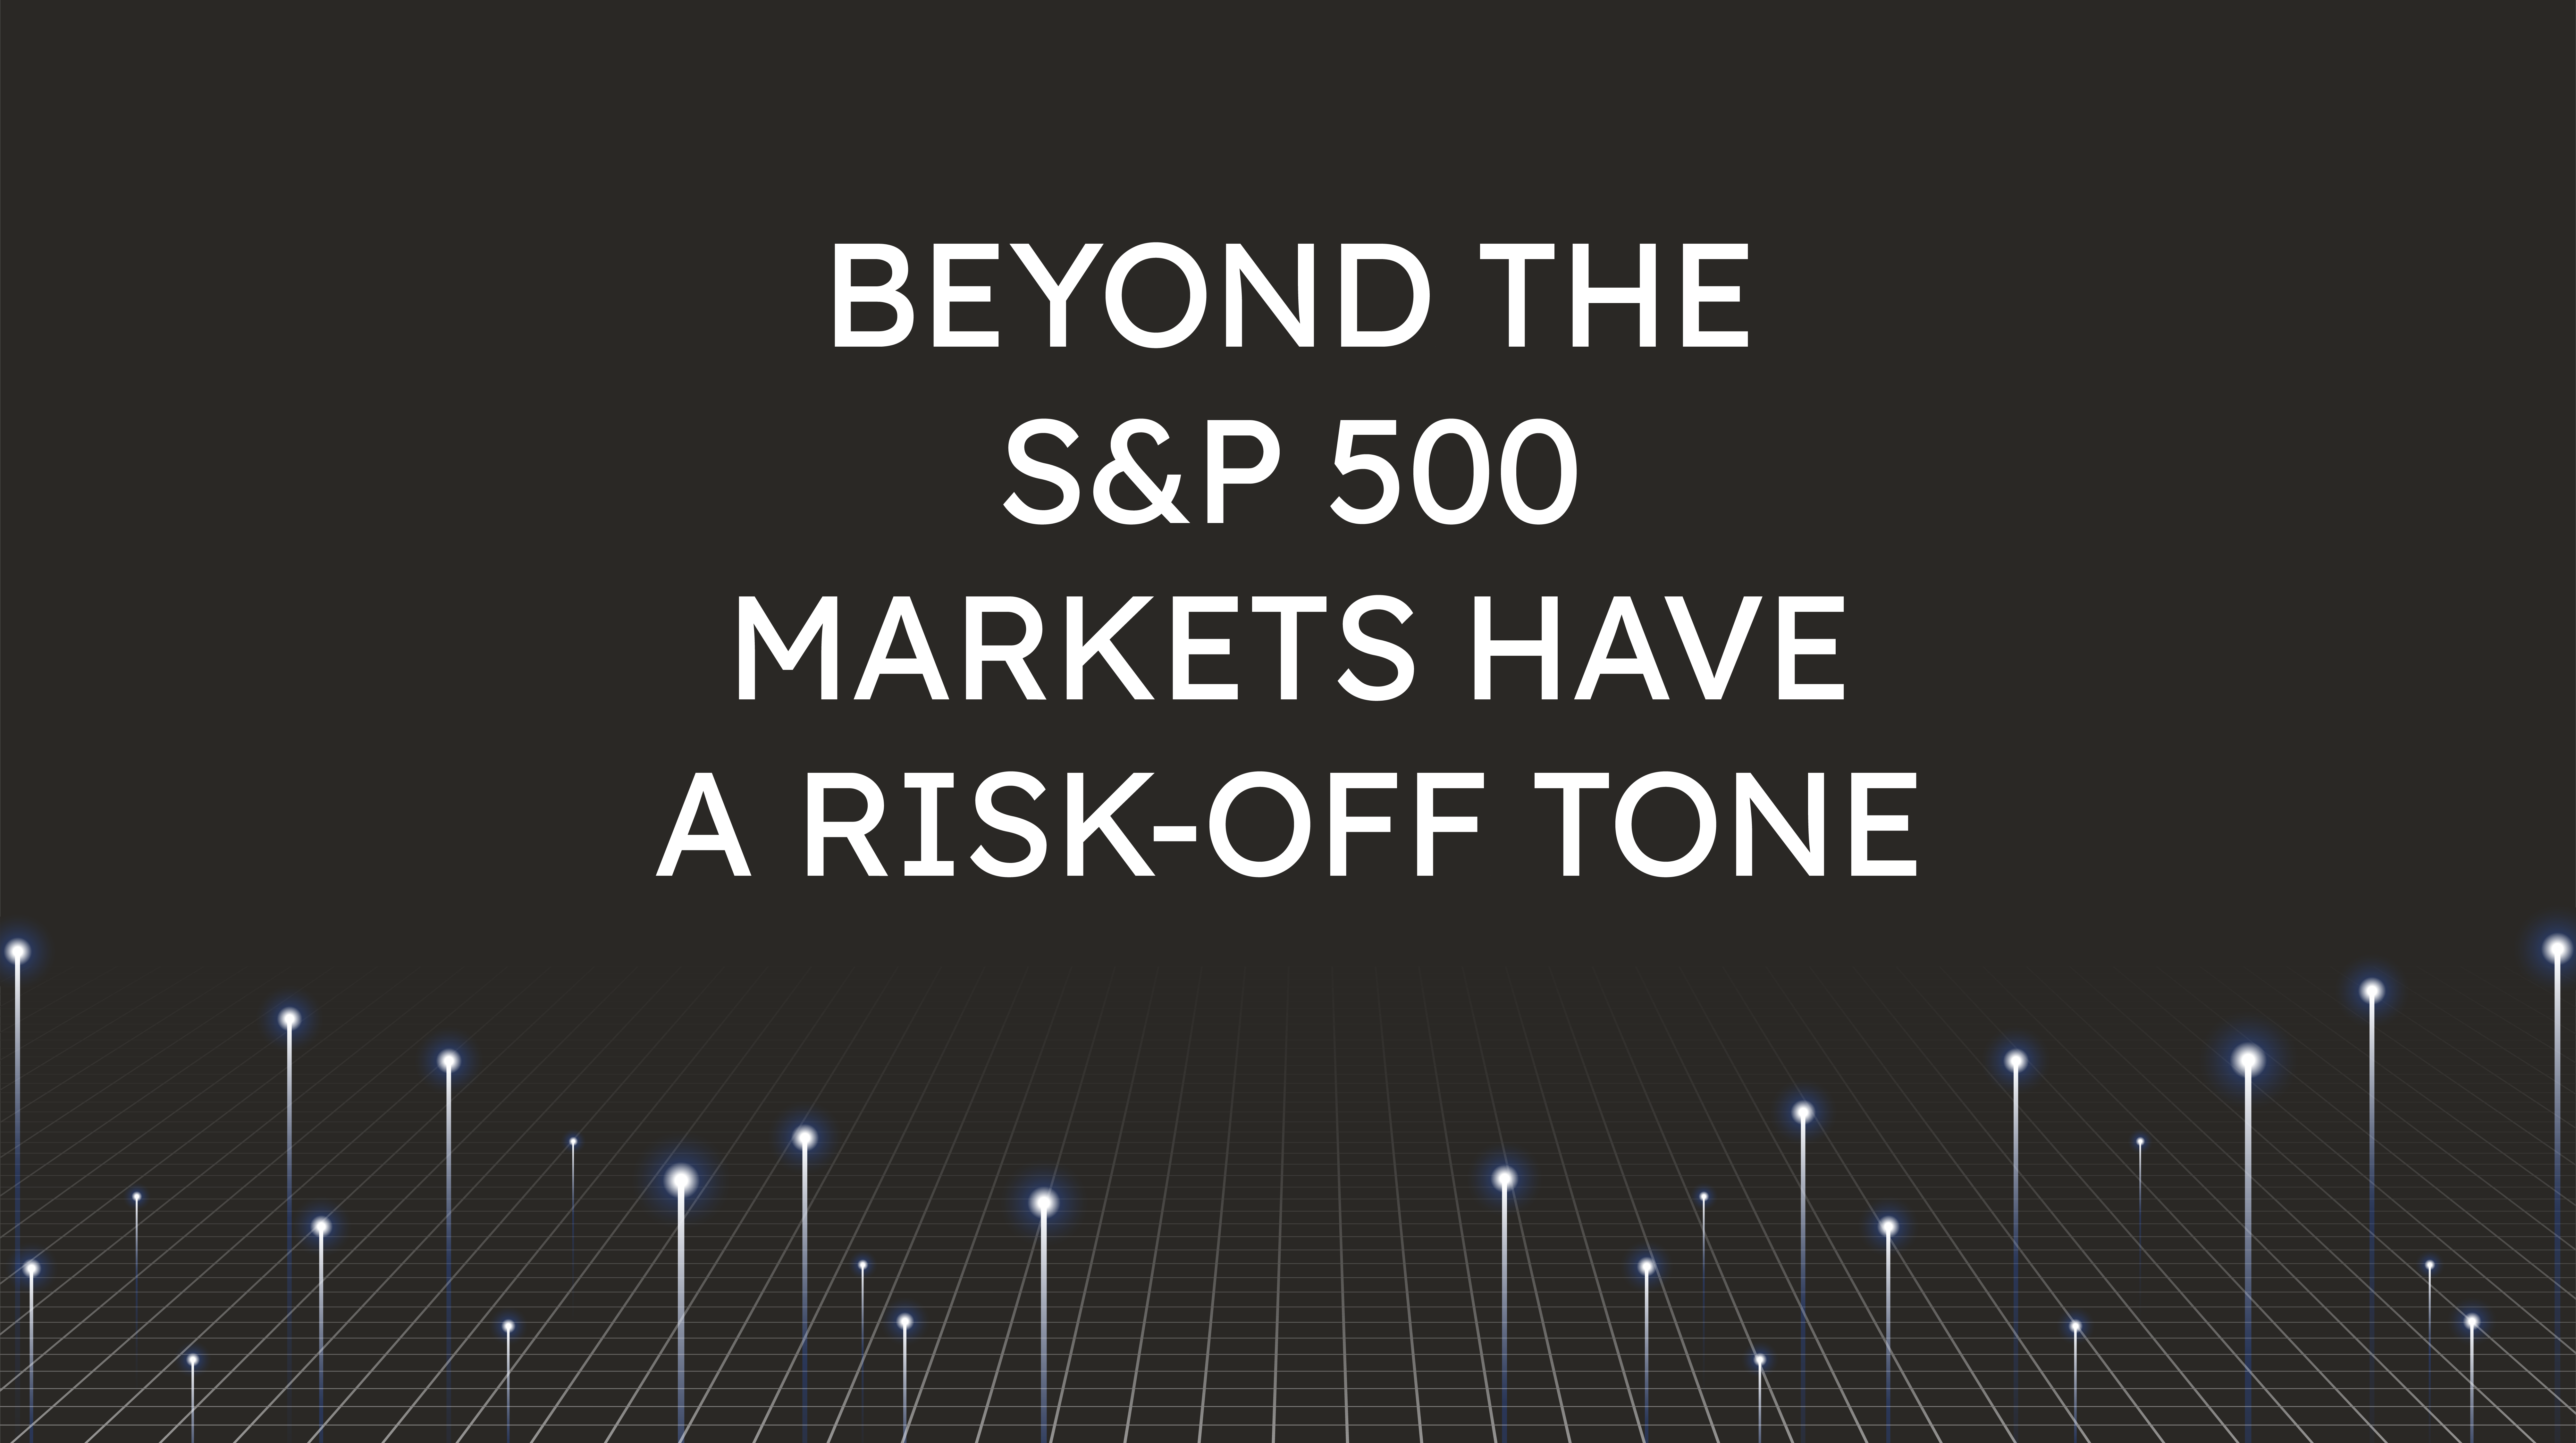 Beyond the S&P 500,  Markets Have a Risk-Off Tone